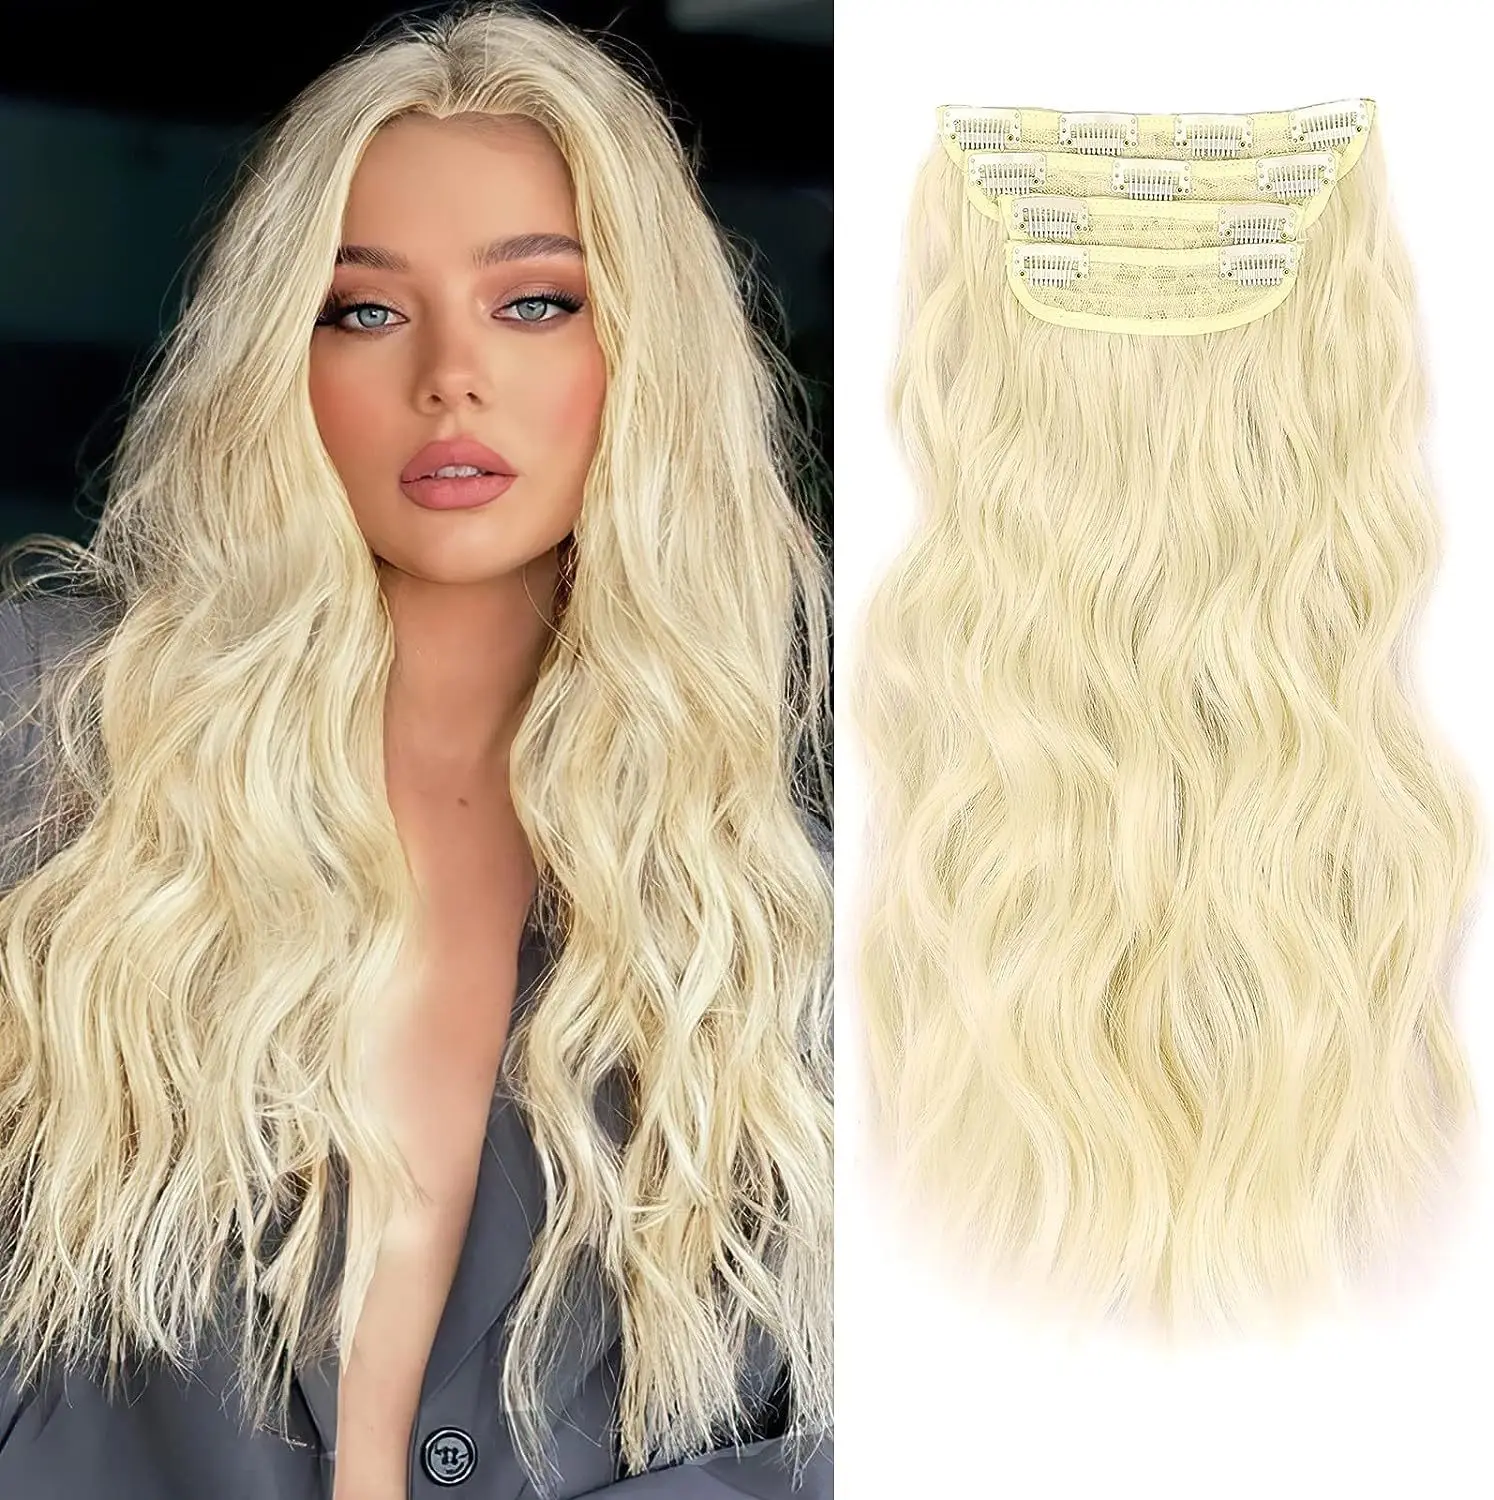 4PCS Clips in Hair Extensions 11Clips 180g Thick Hair Honey Blonde Mixed Light Brown 20 Inch Long Wavy Synthetic Hair Extensions